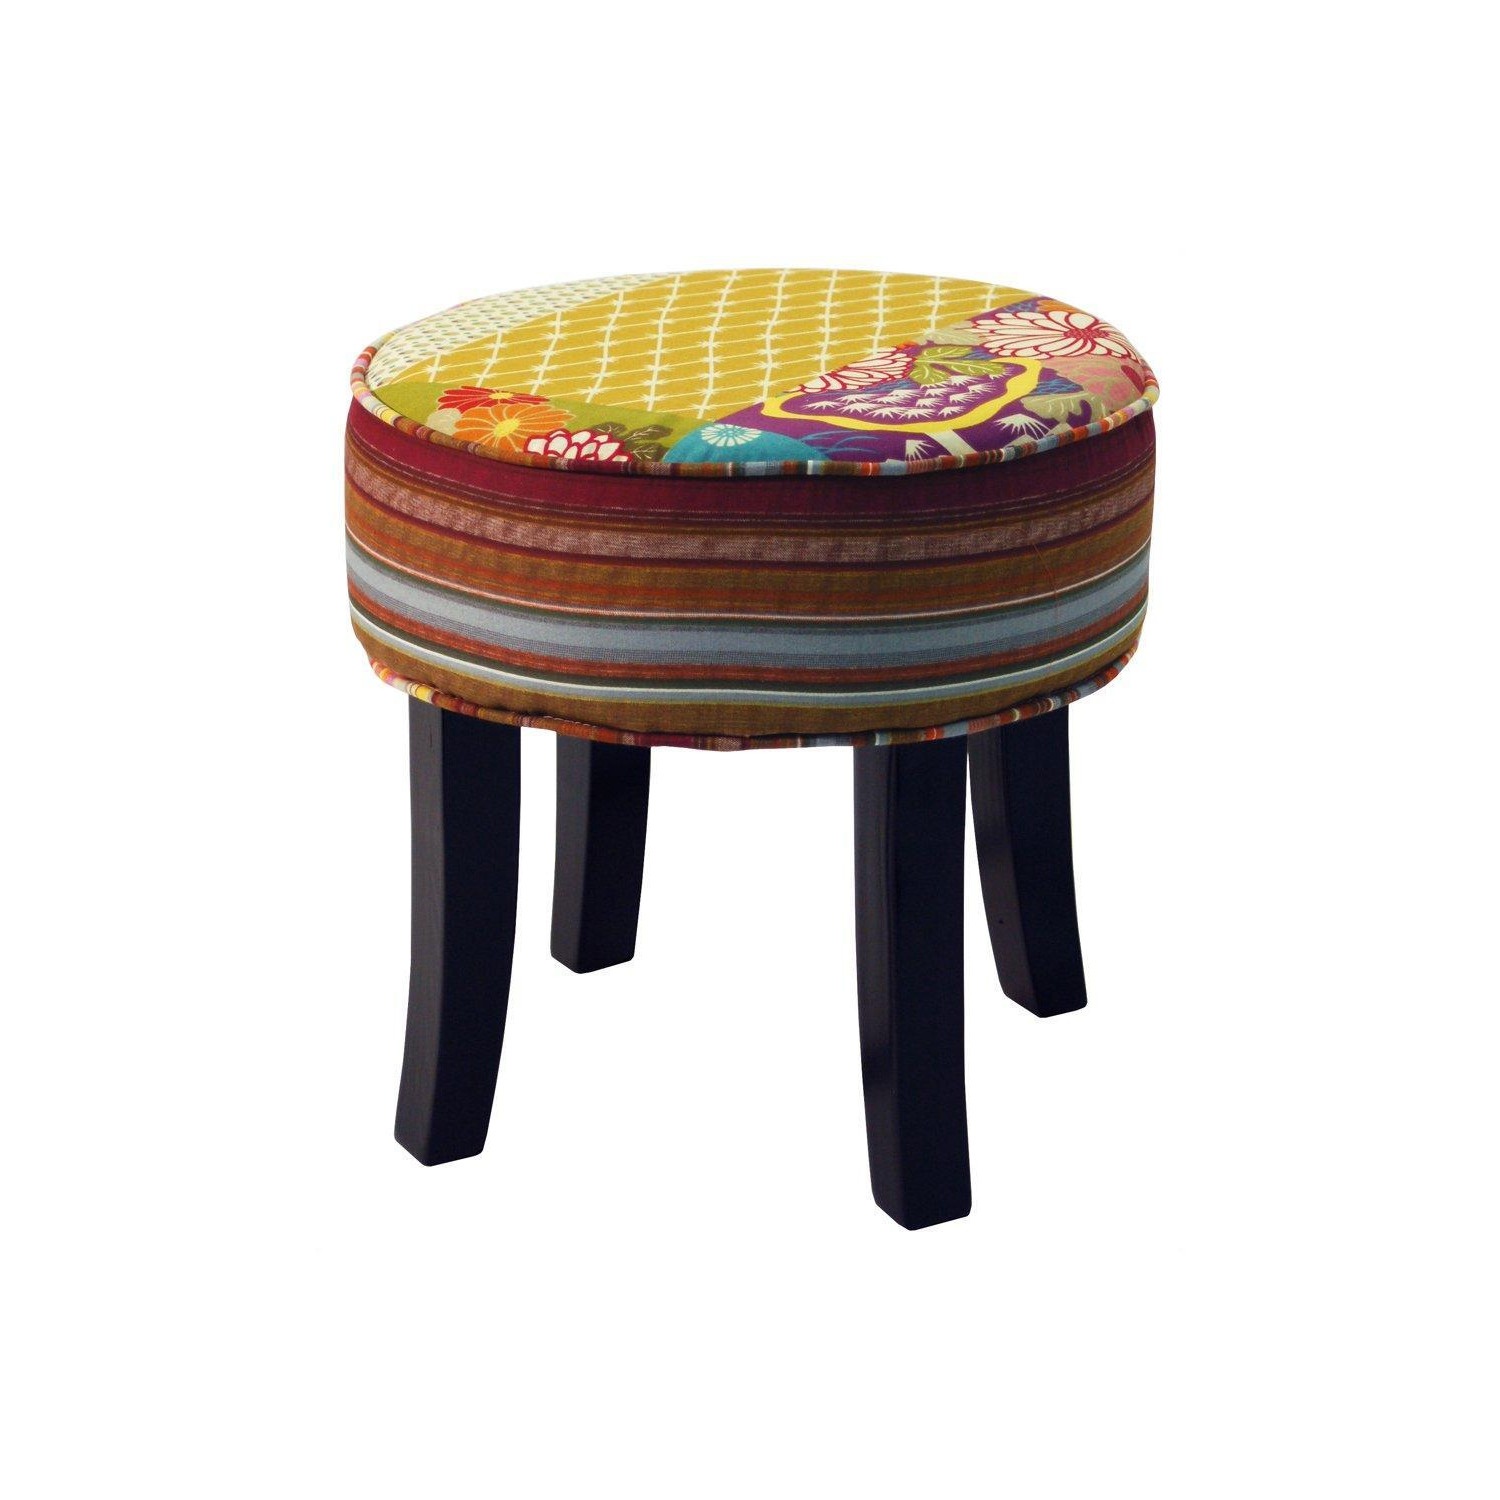 Patchwork - Shabby Chic Round Pouffe Padded Stool wood Legs - Multi-coloured - image 1